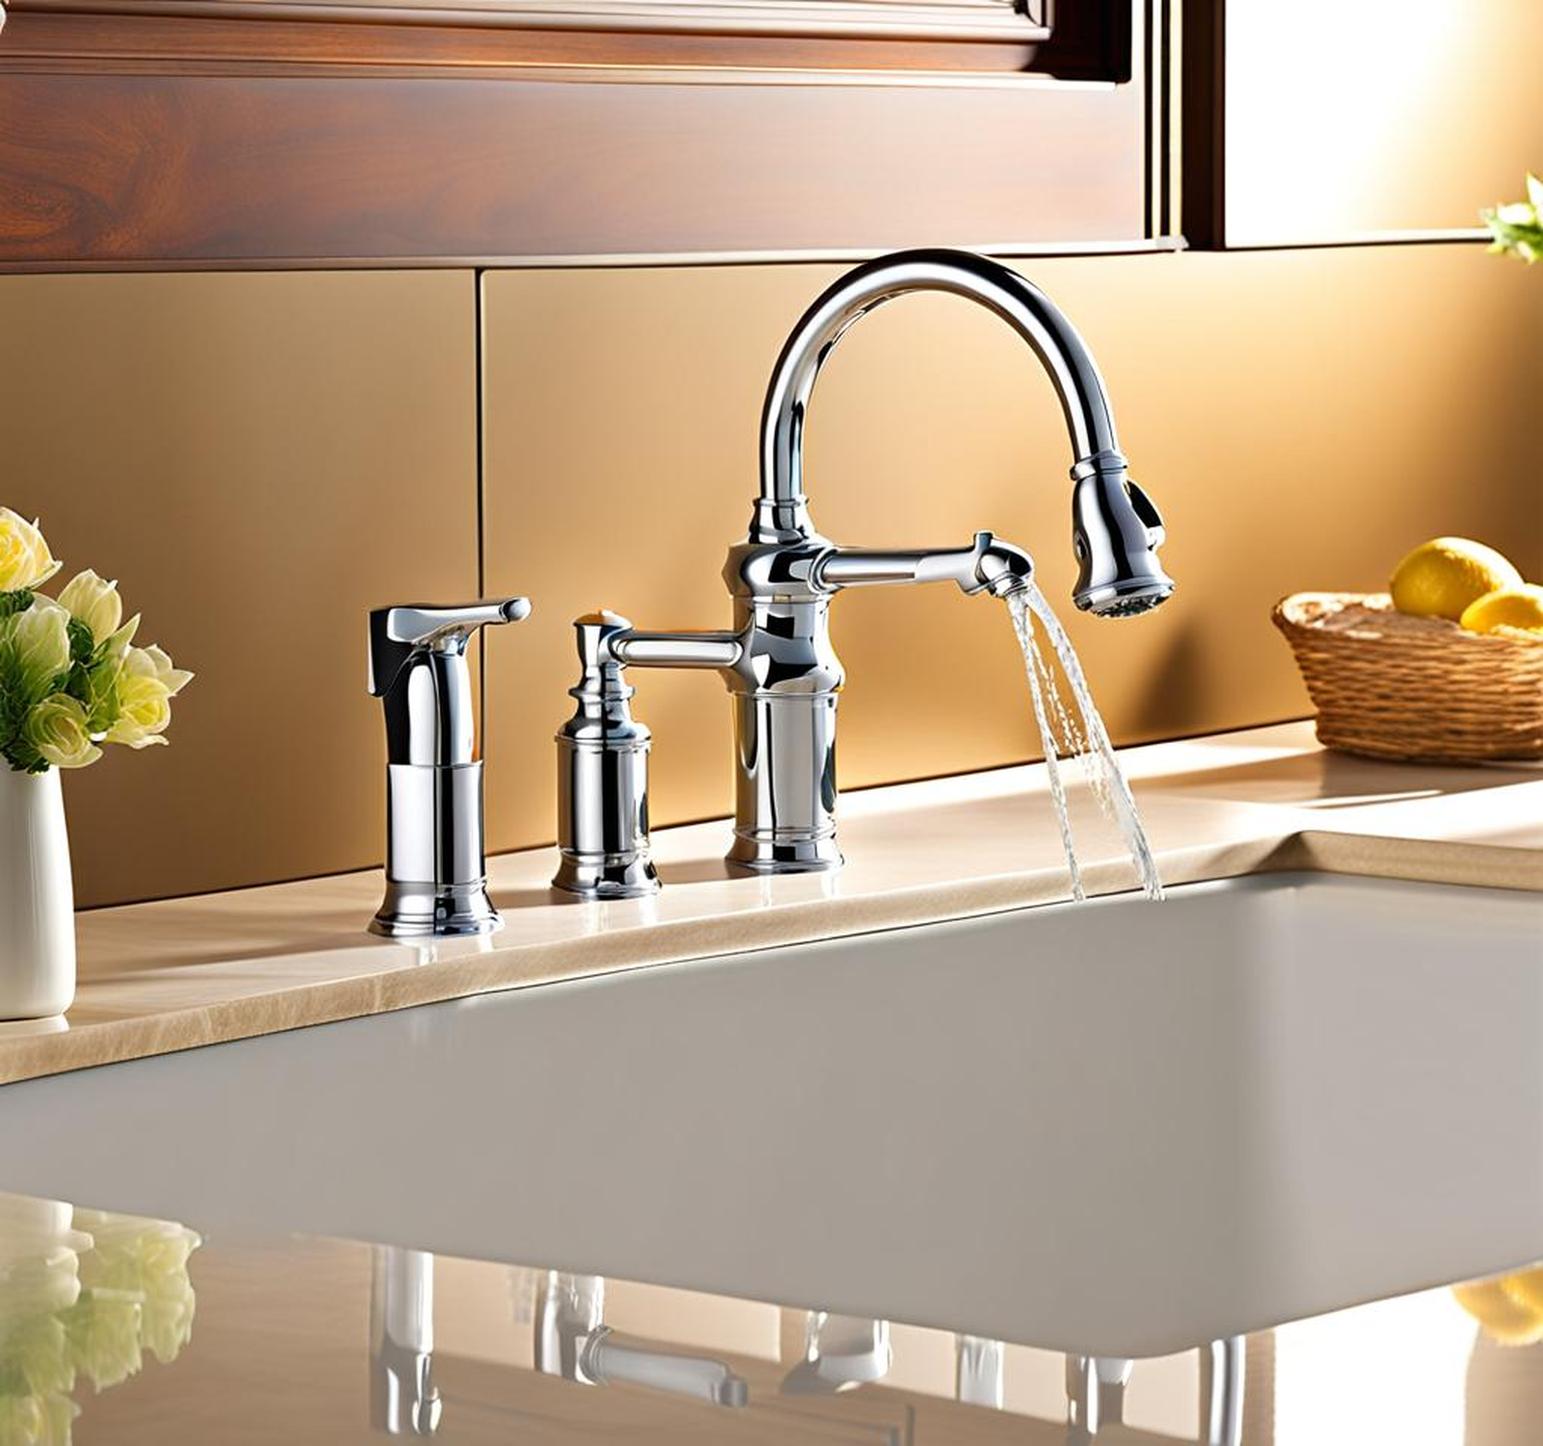 faucet supply line types